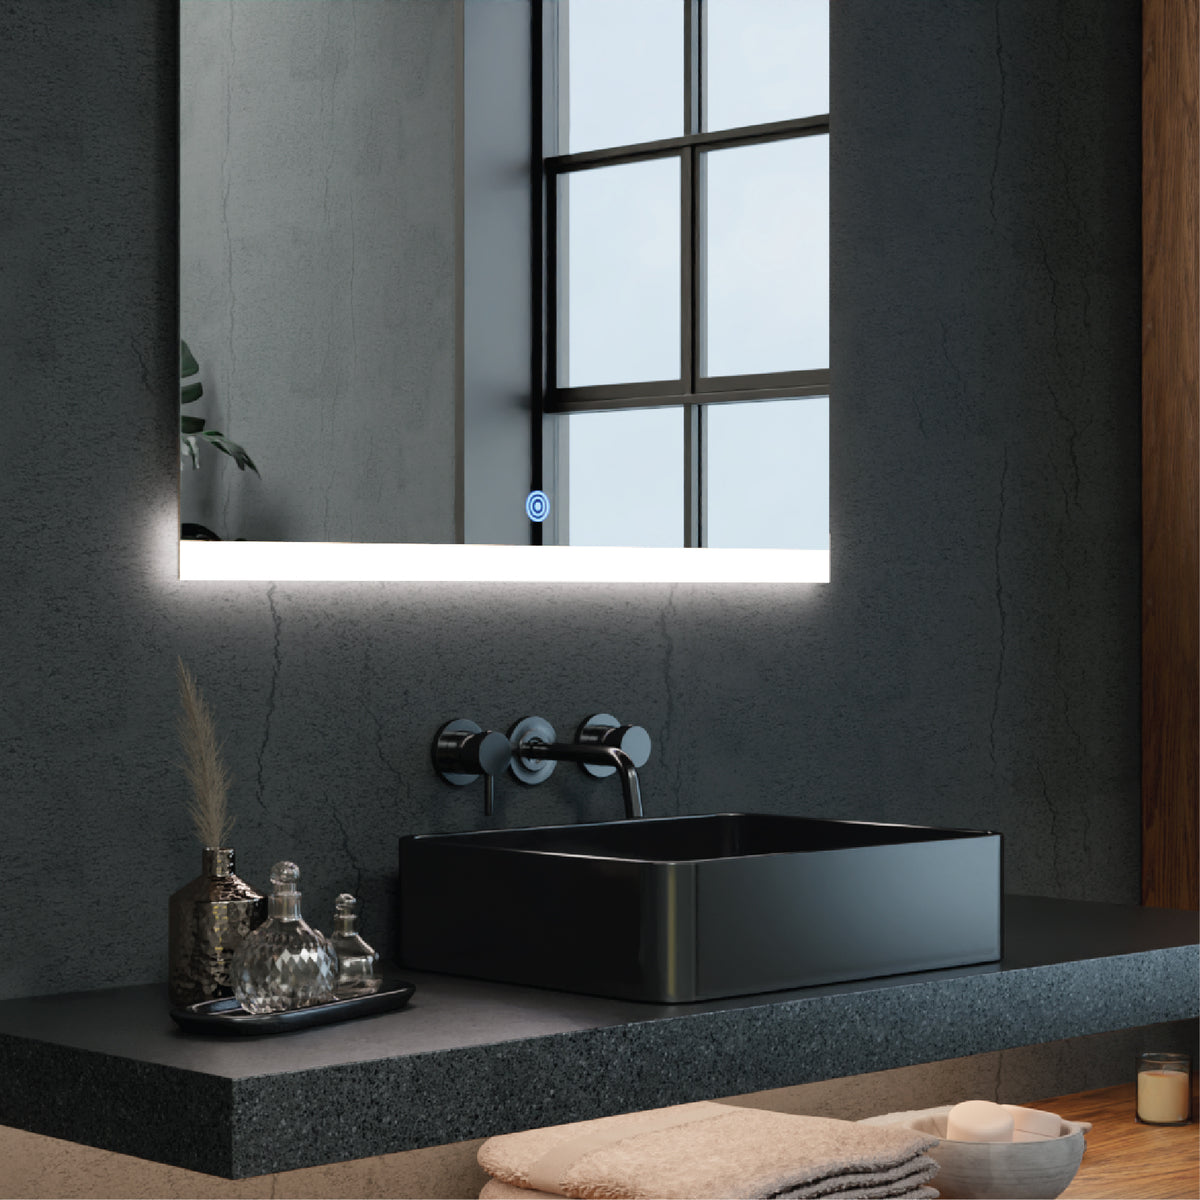  Experience luxury with Titan's LED Mirror, where style meets practicality in your bathroom oasis.